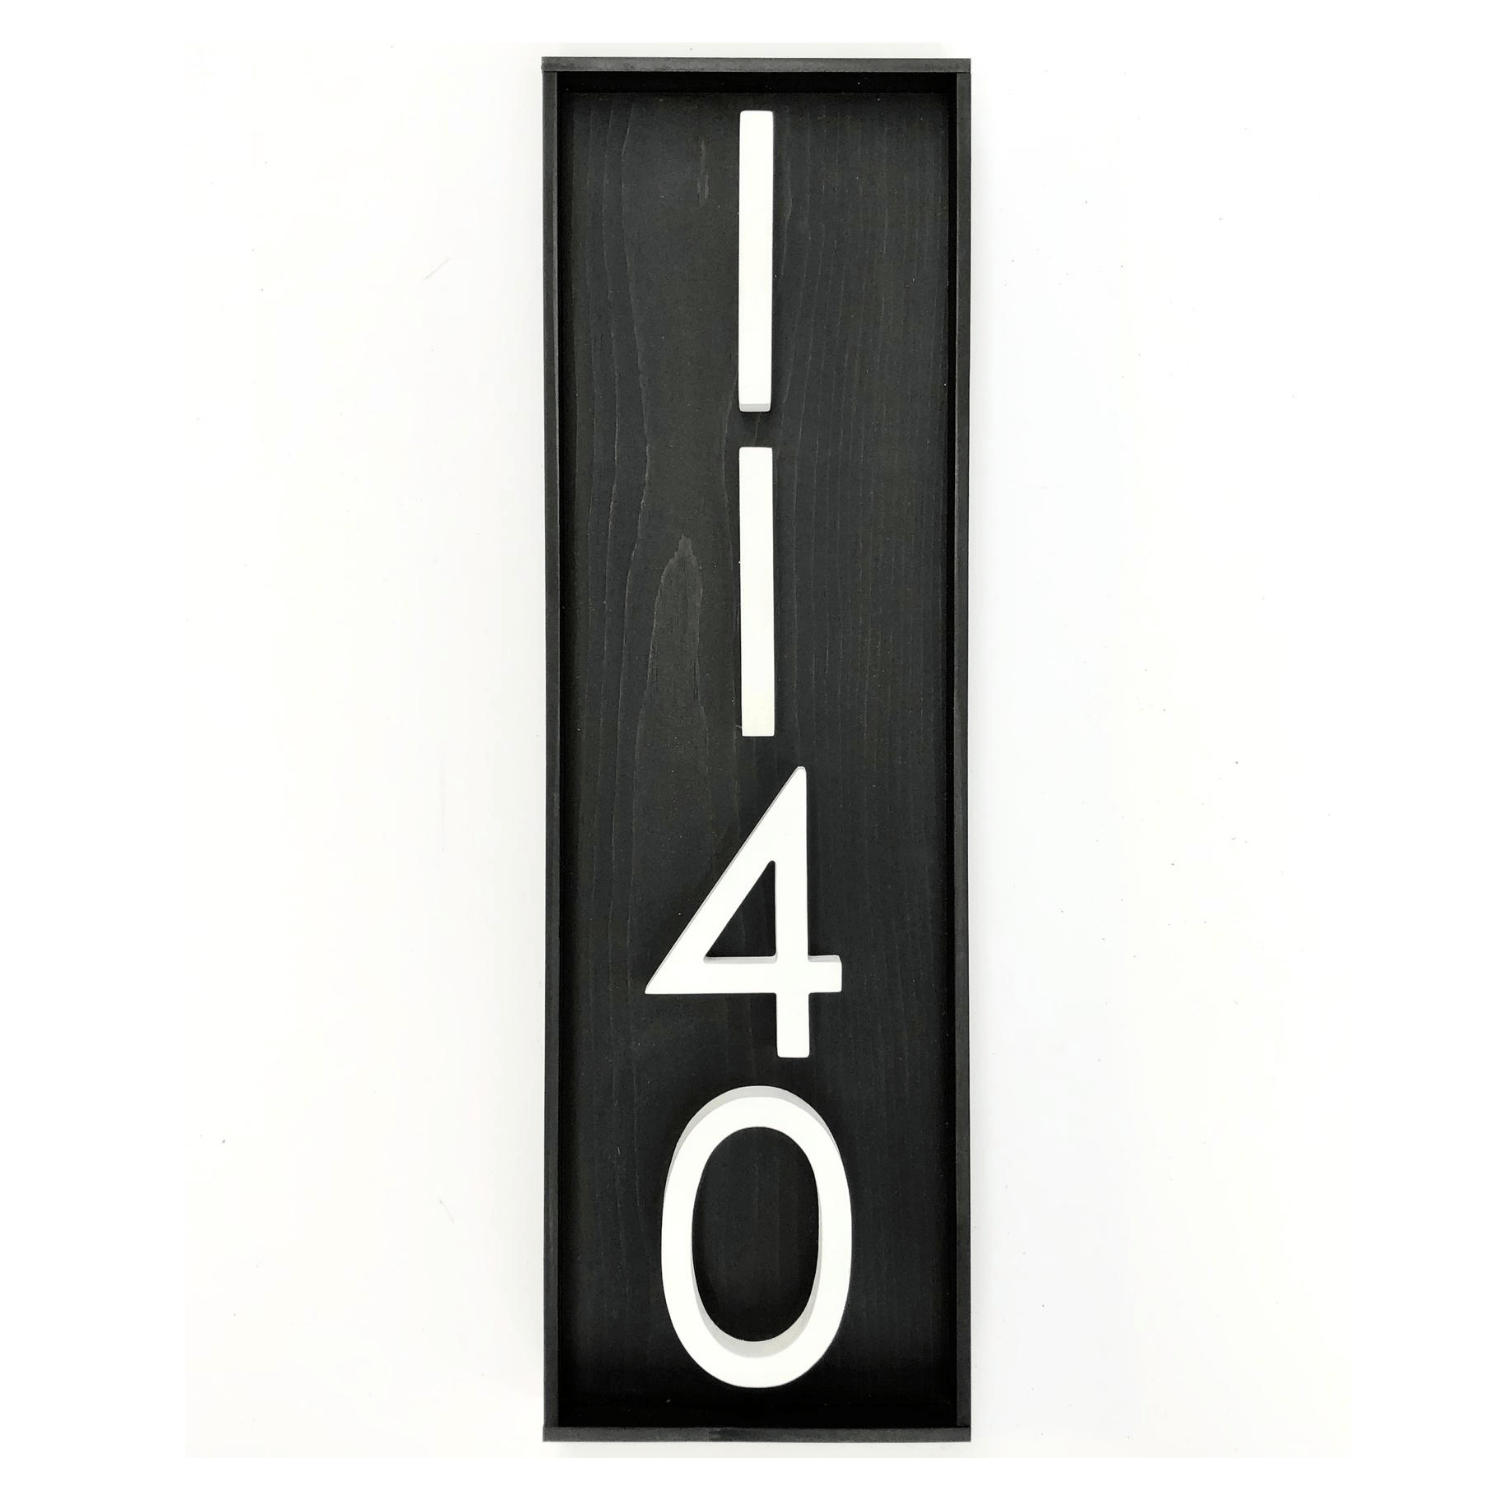 Vertical address sign with black base and 1 modern white PVC numbers